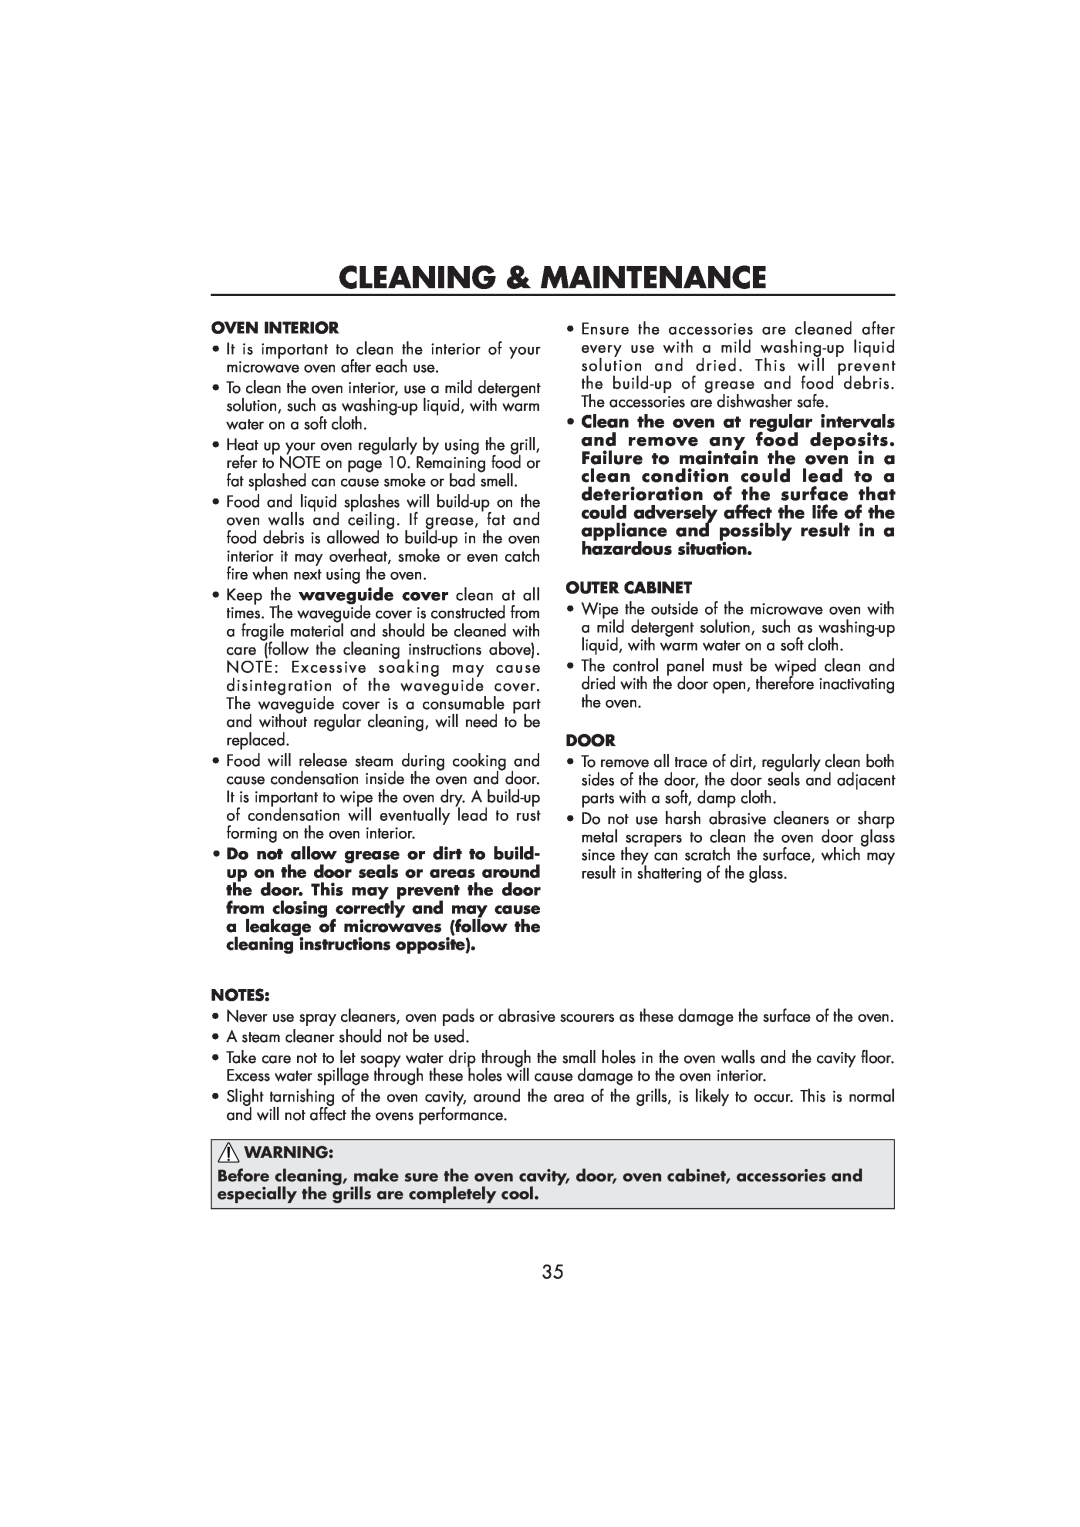 Sharp R-890SLM operation manual Cleaning & Maintenance, Oven Interior, Outer Cabinet, Door 